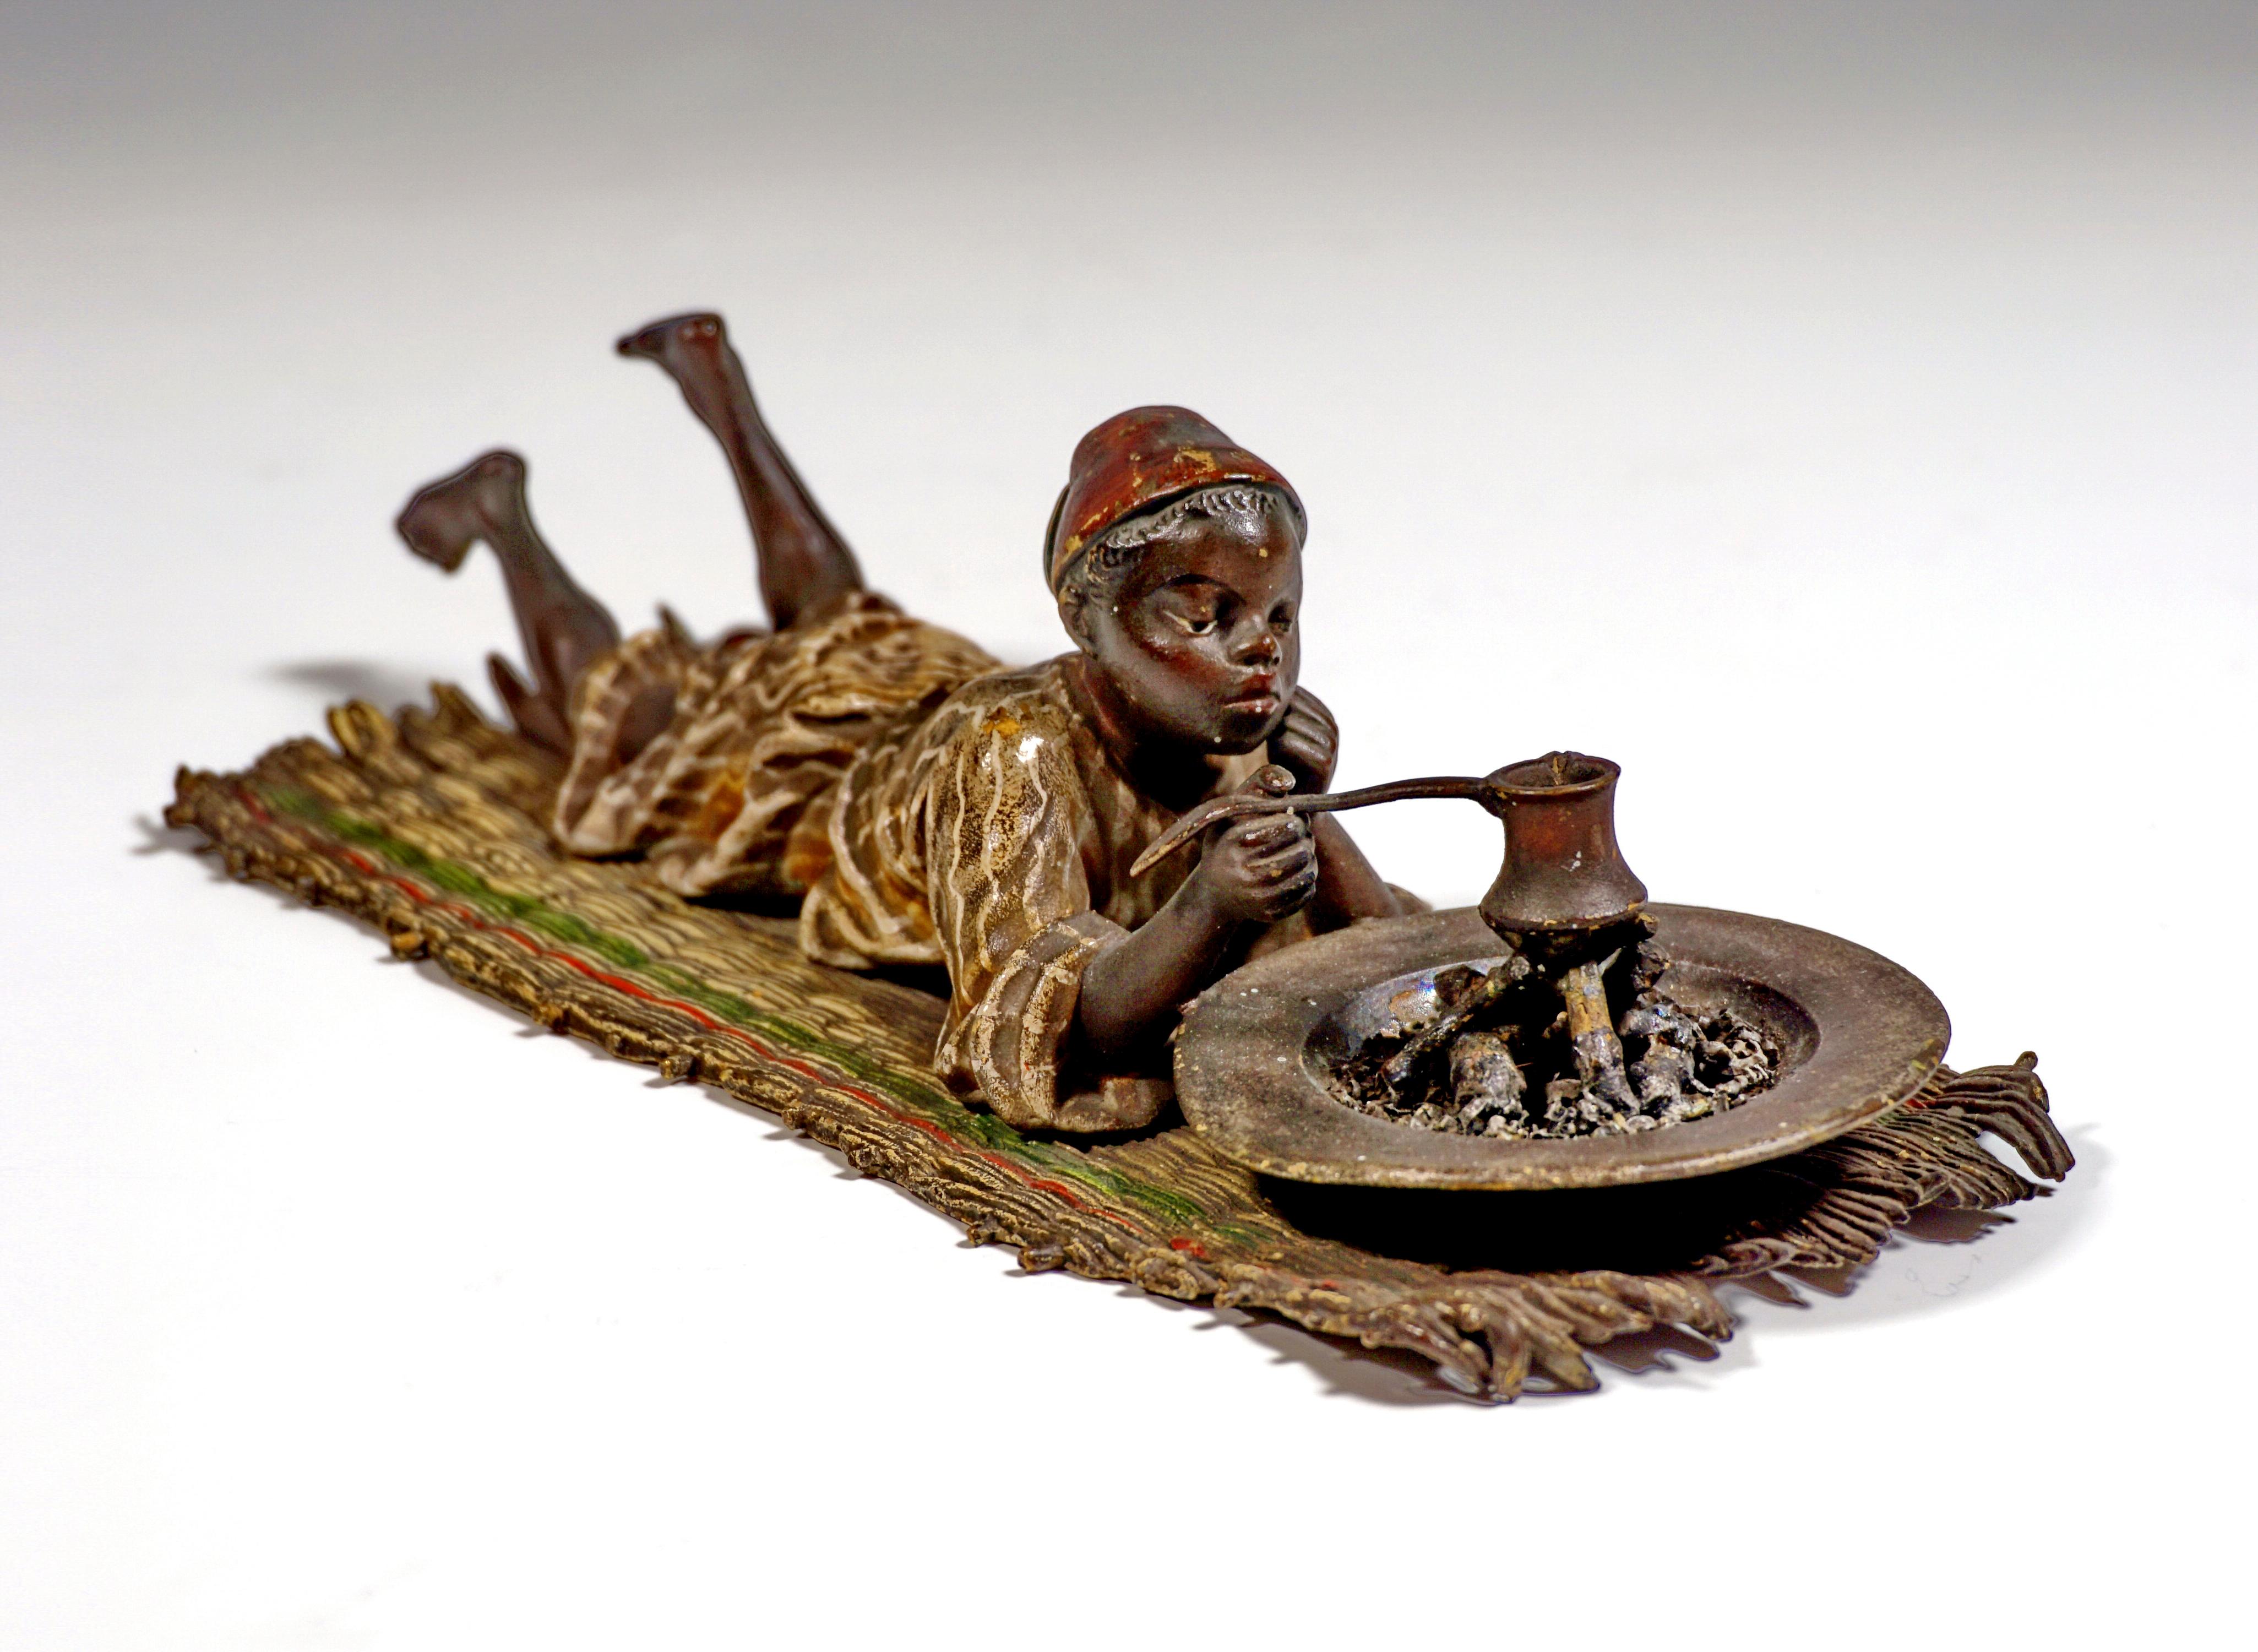 Excellent Piece of Viennese Bronze Art around 1900:
Oriental boy with fez in a long, striped robe lying on his belly on a straw mat, supporting his head with his left hand, making coffee in a small, long-handled vessel on a brazier.
The figure is